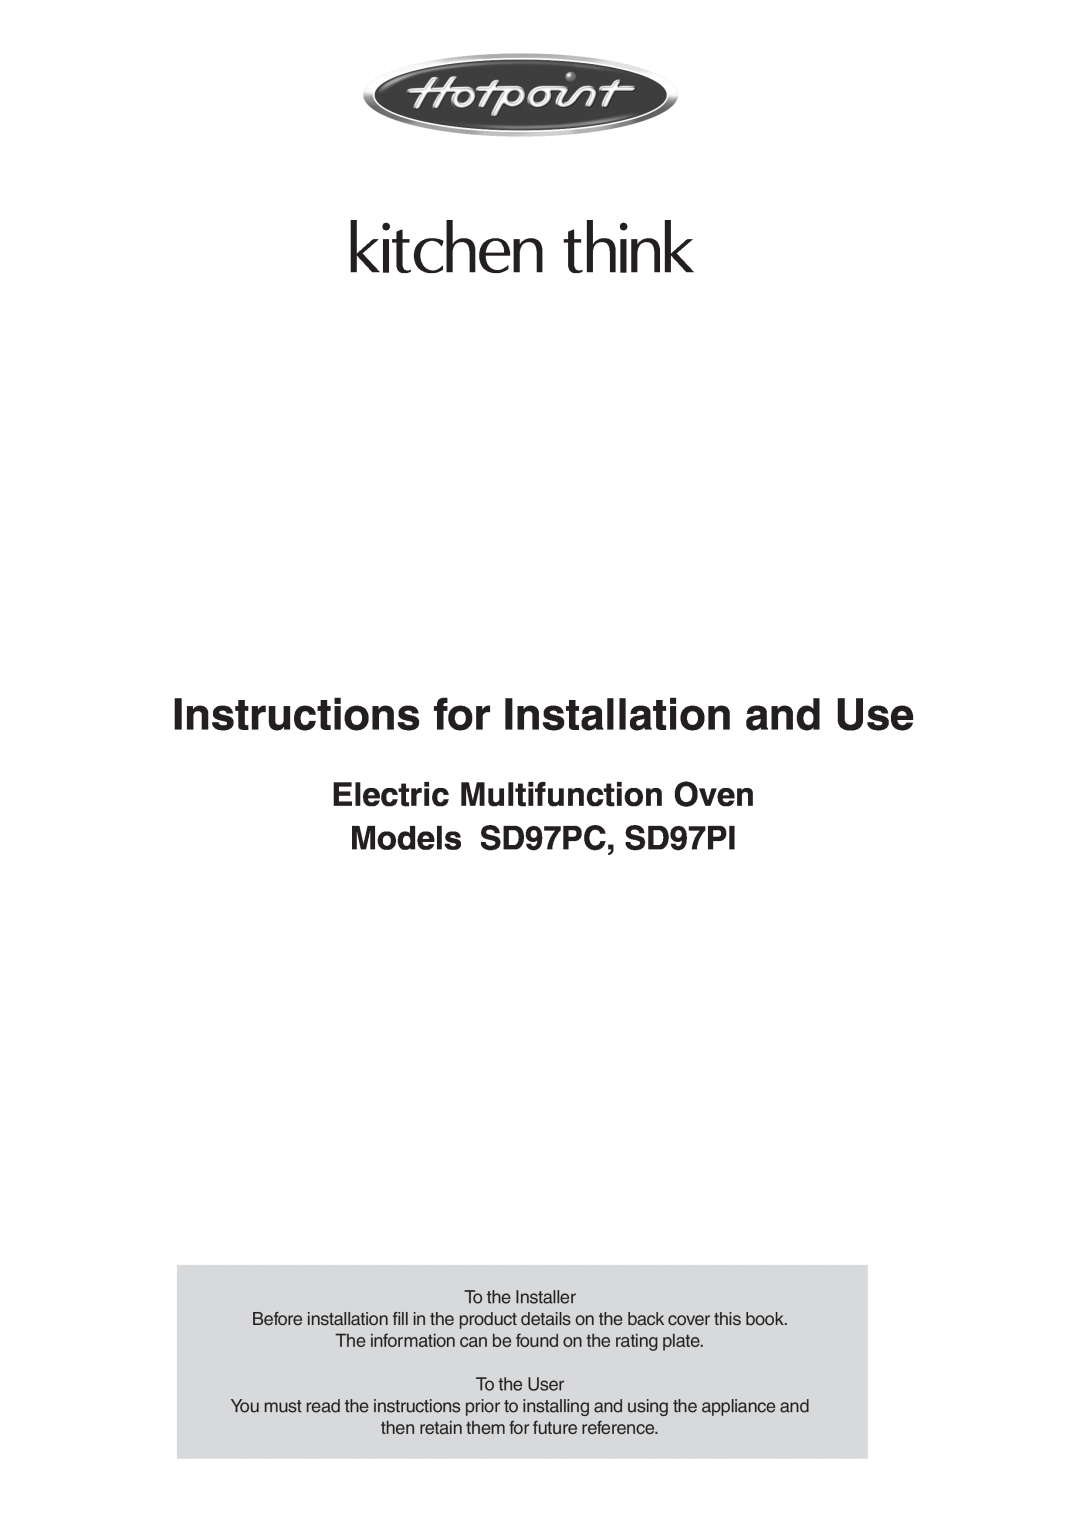 Hotpoint manual Instructions for Installation and Use, Electric Multifunction Oven Models SD97PC, SD97PI, kitchen think 